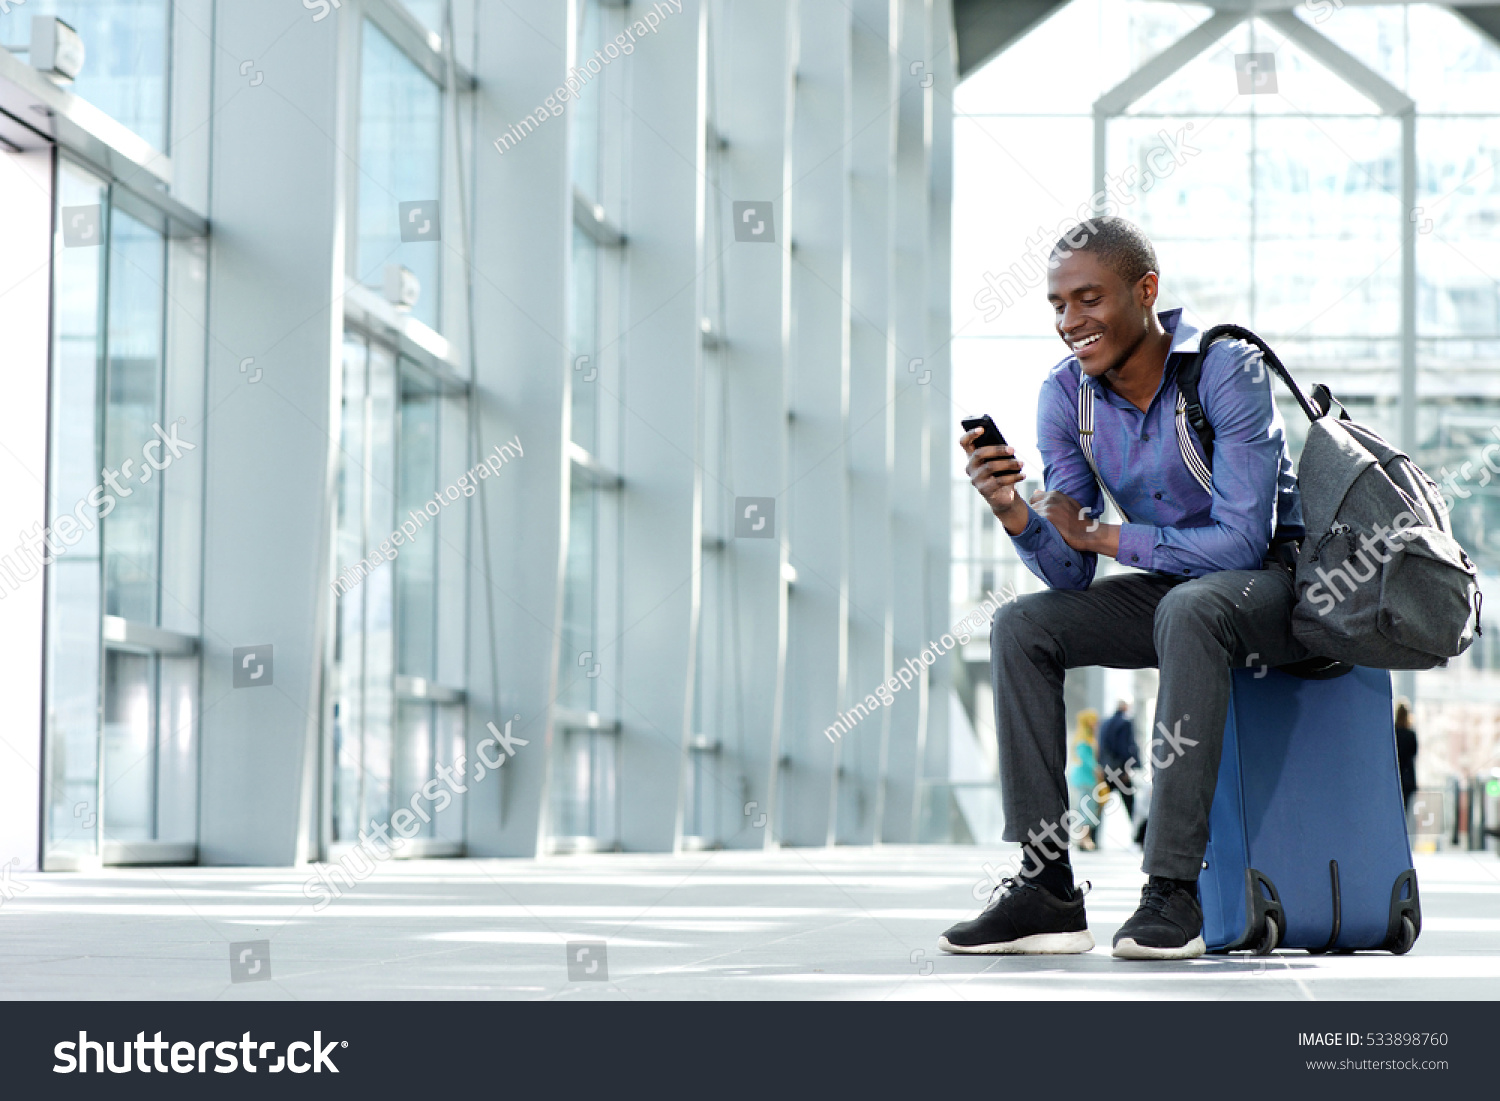 Side portrait of smiling young businessman sitting on suitcase looking at phone #533898760